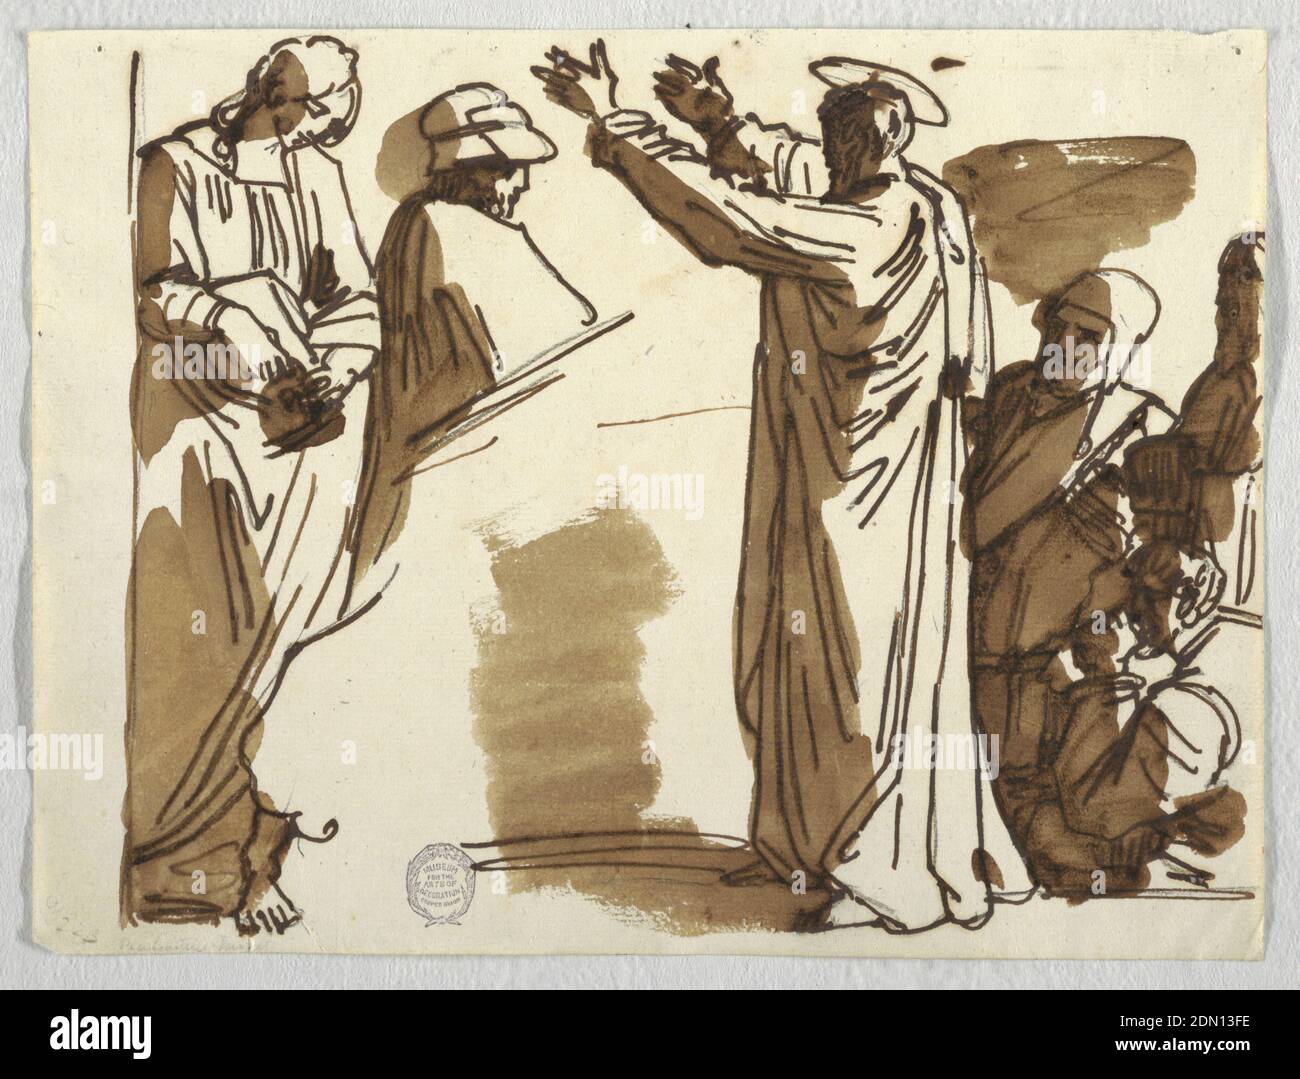 Cartoons of Death of Ananias and St. Paul, after Raphael, Felice Giani, Italian, 1758–1823, Pen and dark ink, brush and sepia wash over traces of graphite on laid paper, A haloed figure gestures to a woman and two men., Italy, ca. 1820, graphic design, Drawing Stock Photo